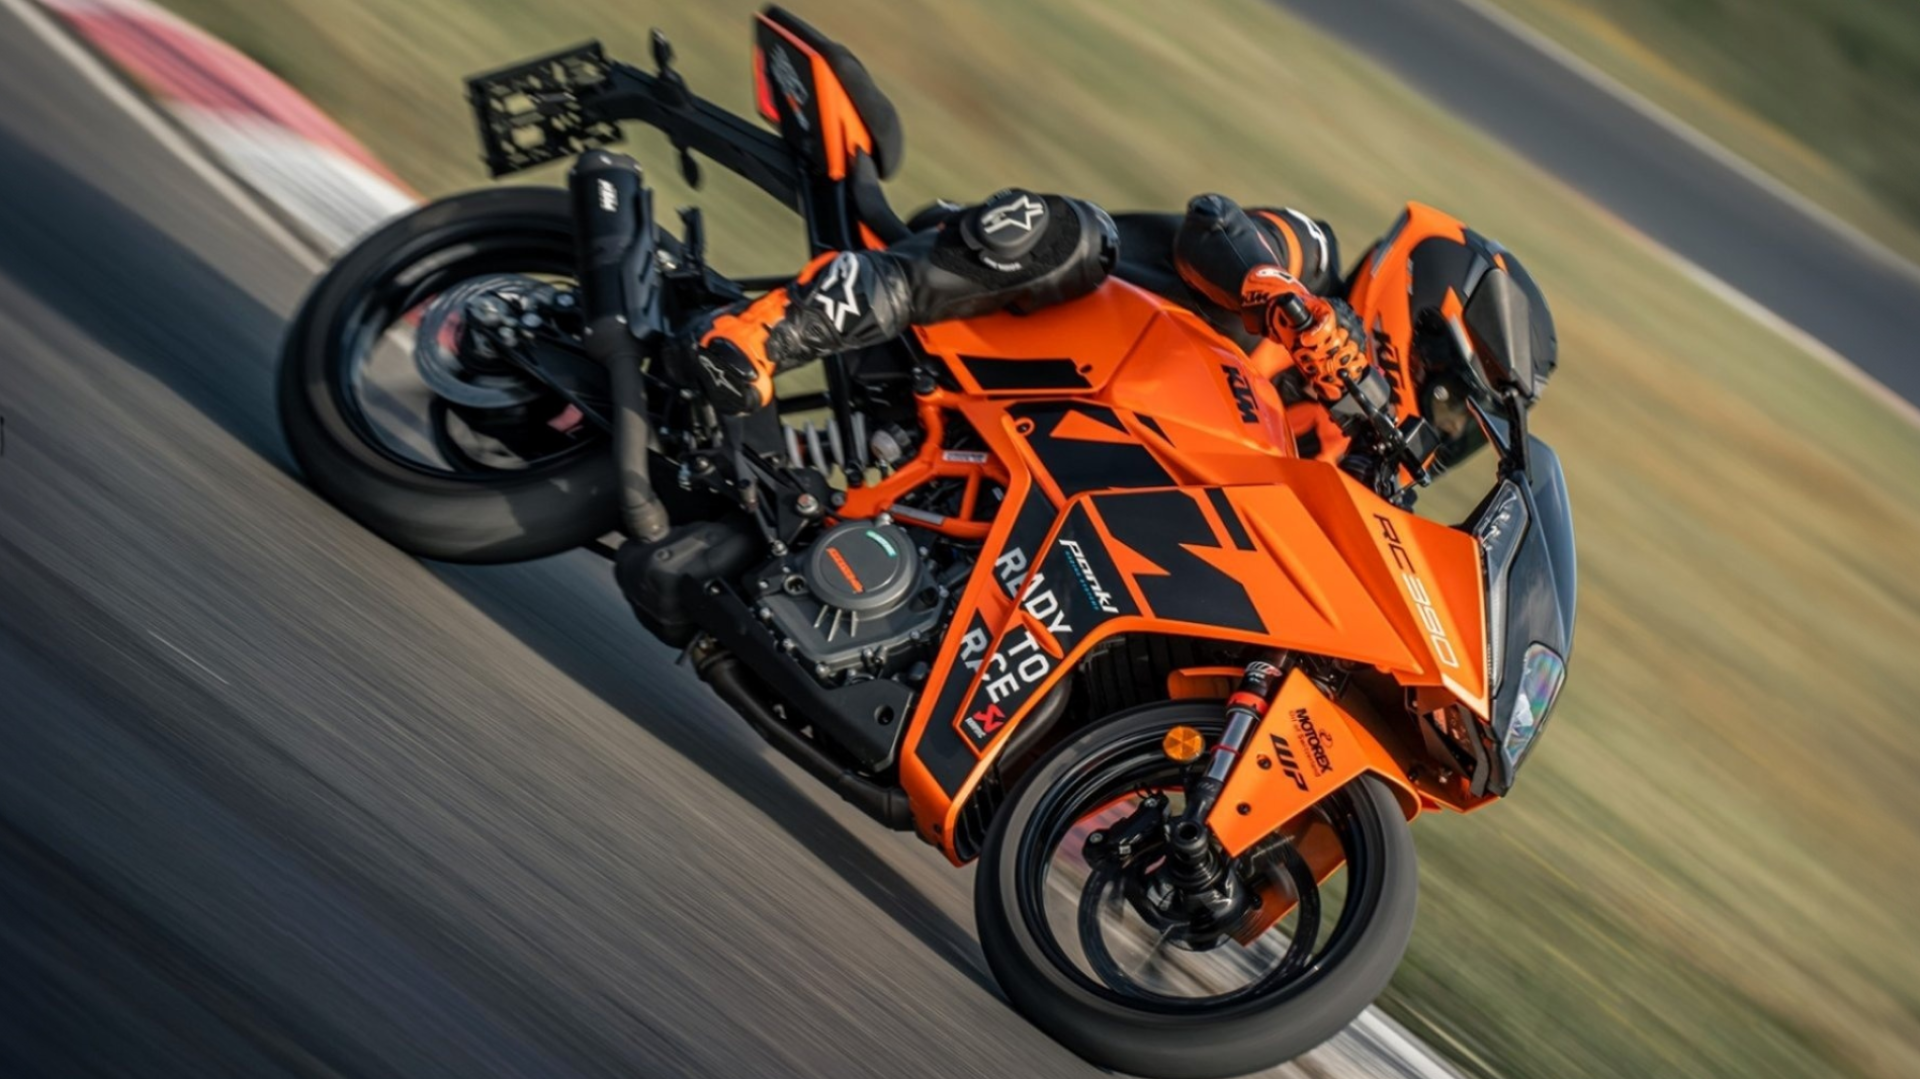 2023 KTM RC 390 cornering on a racetrack cinematic view